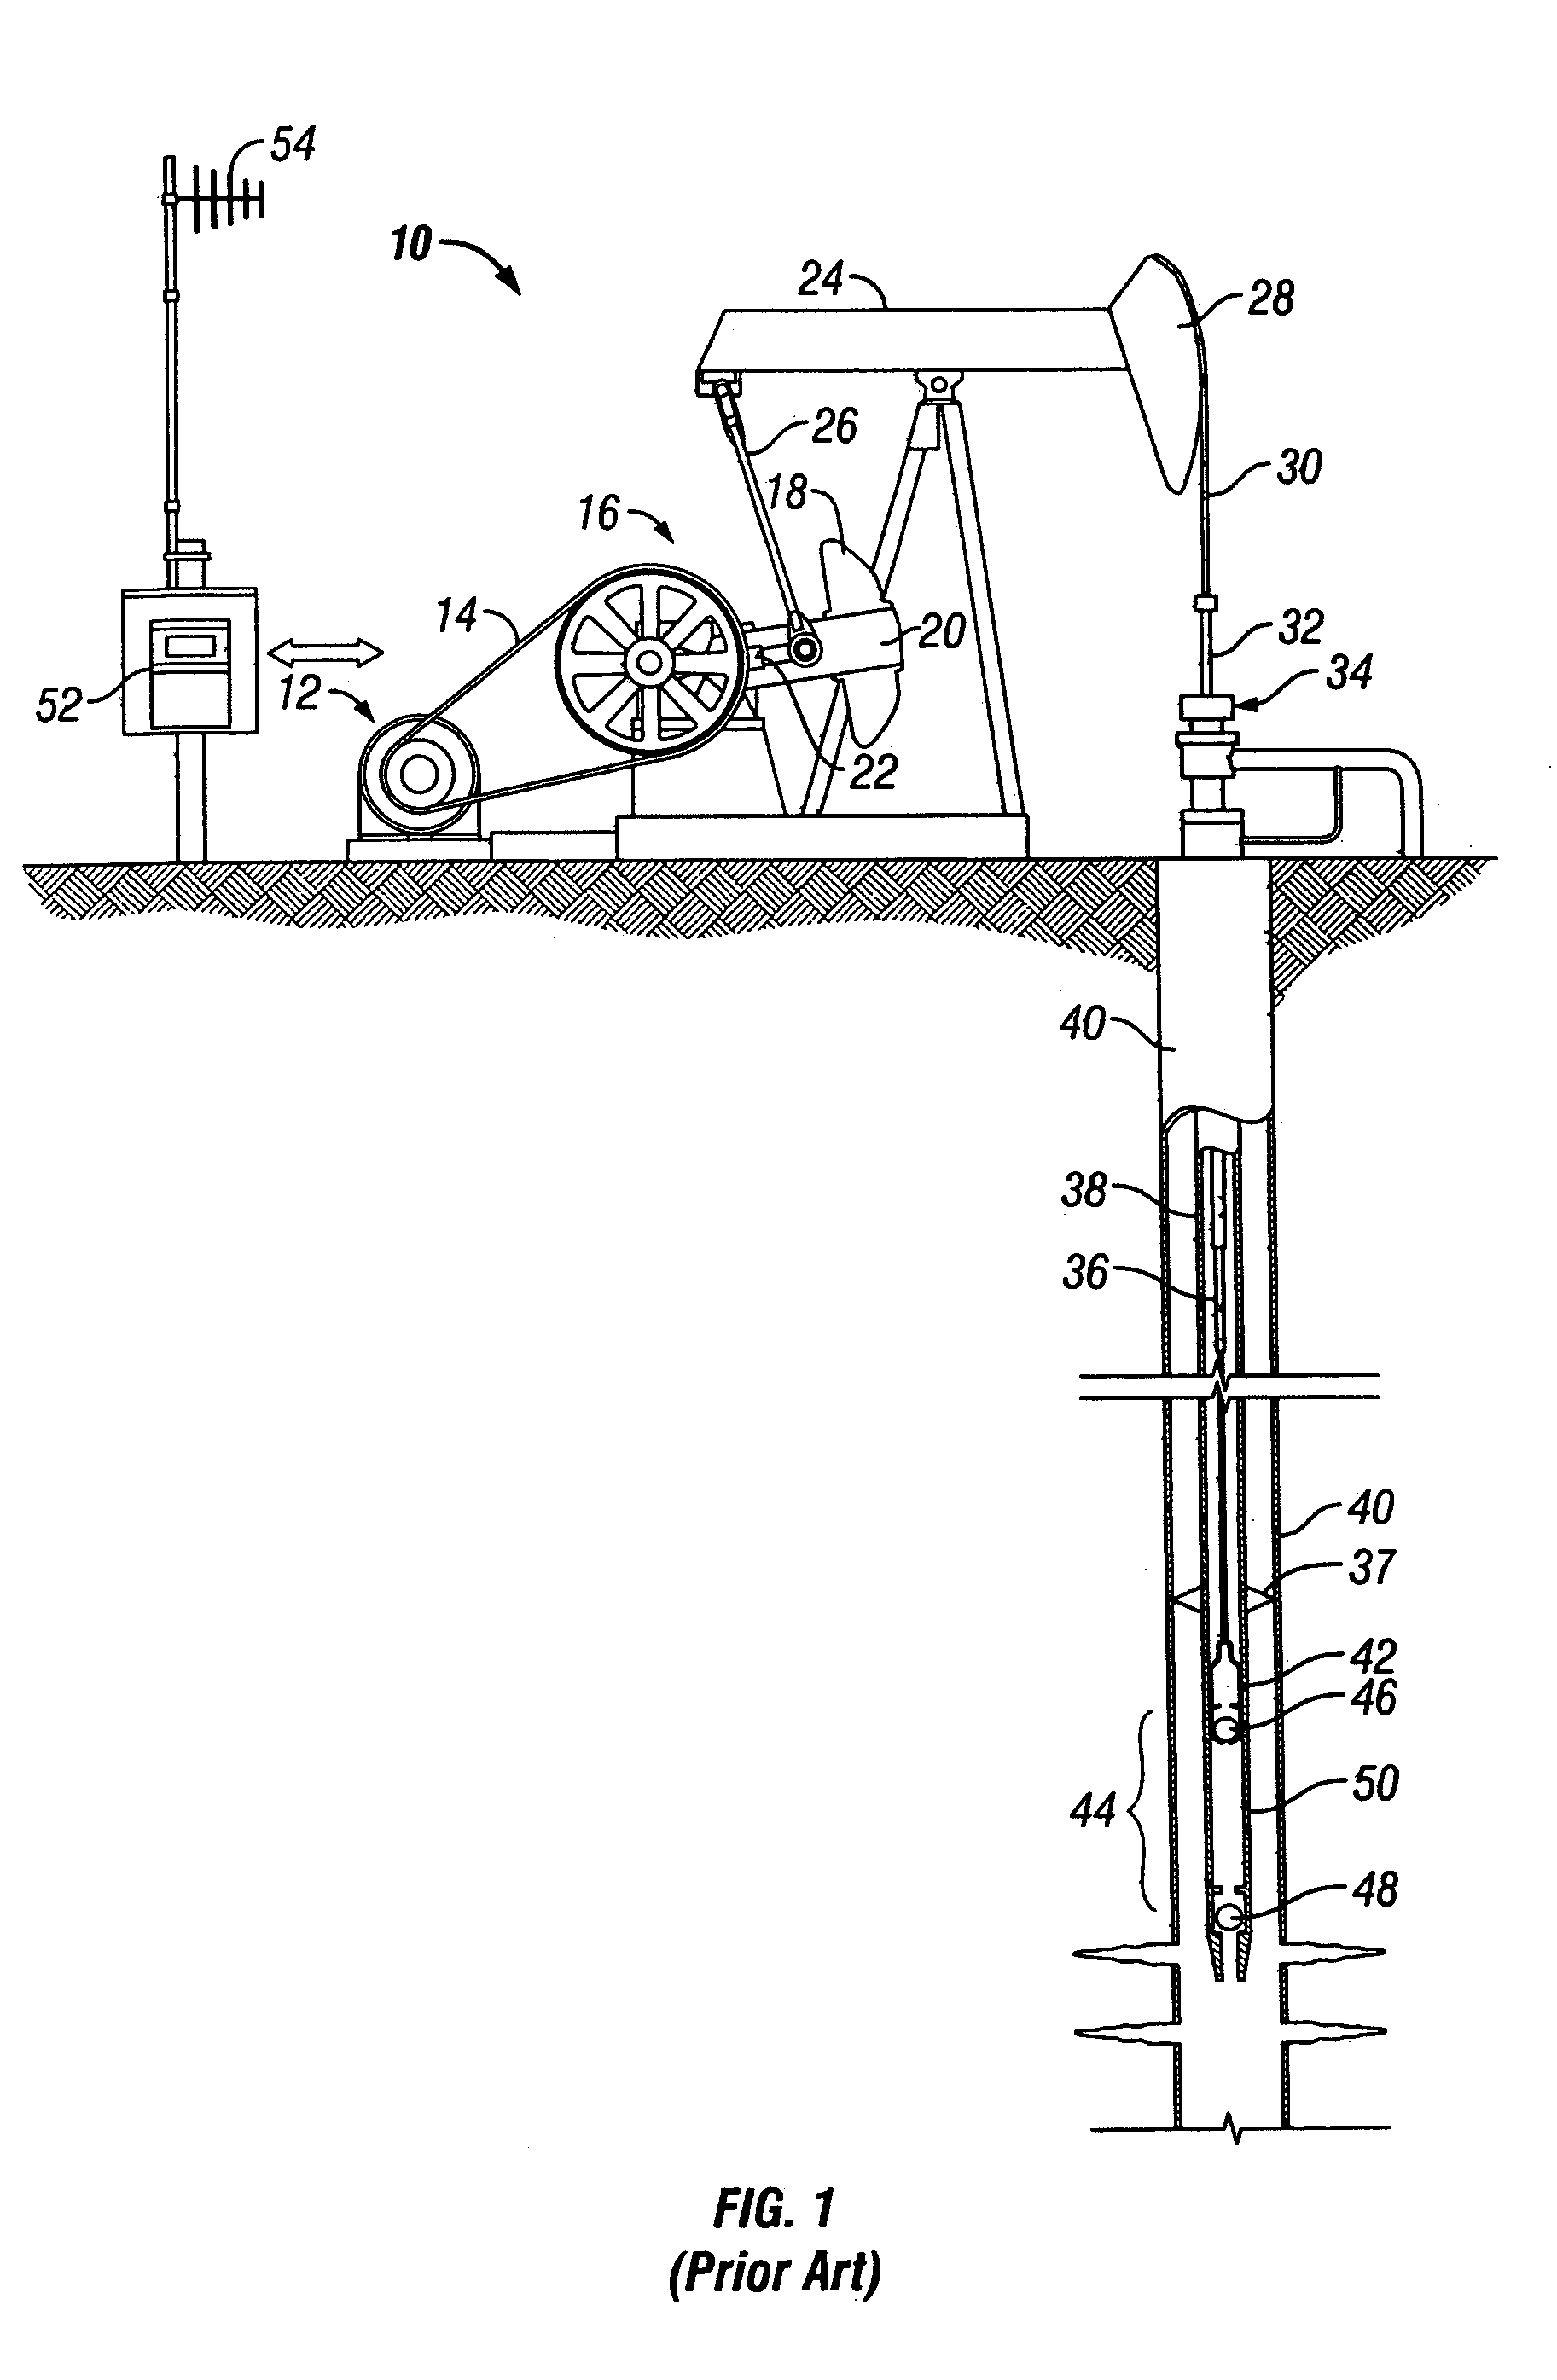 Inferred production rates of a rod pumped well from surface and pump card information